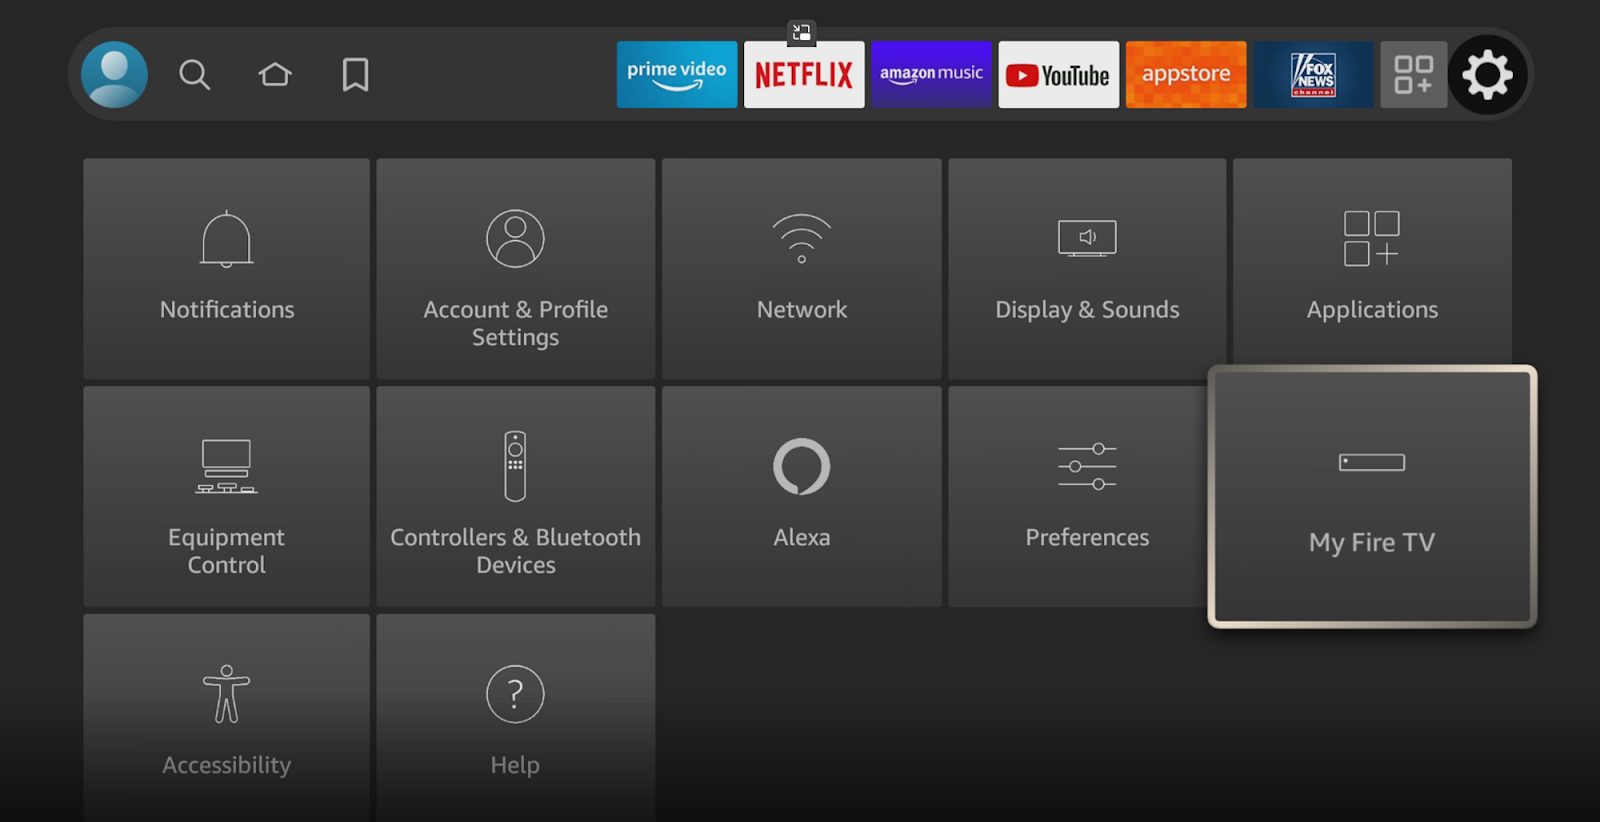 How to access My Fire Tv on Amazon Firestick